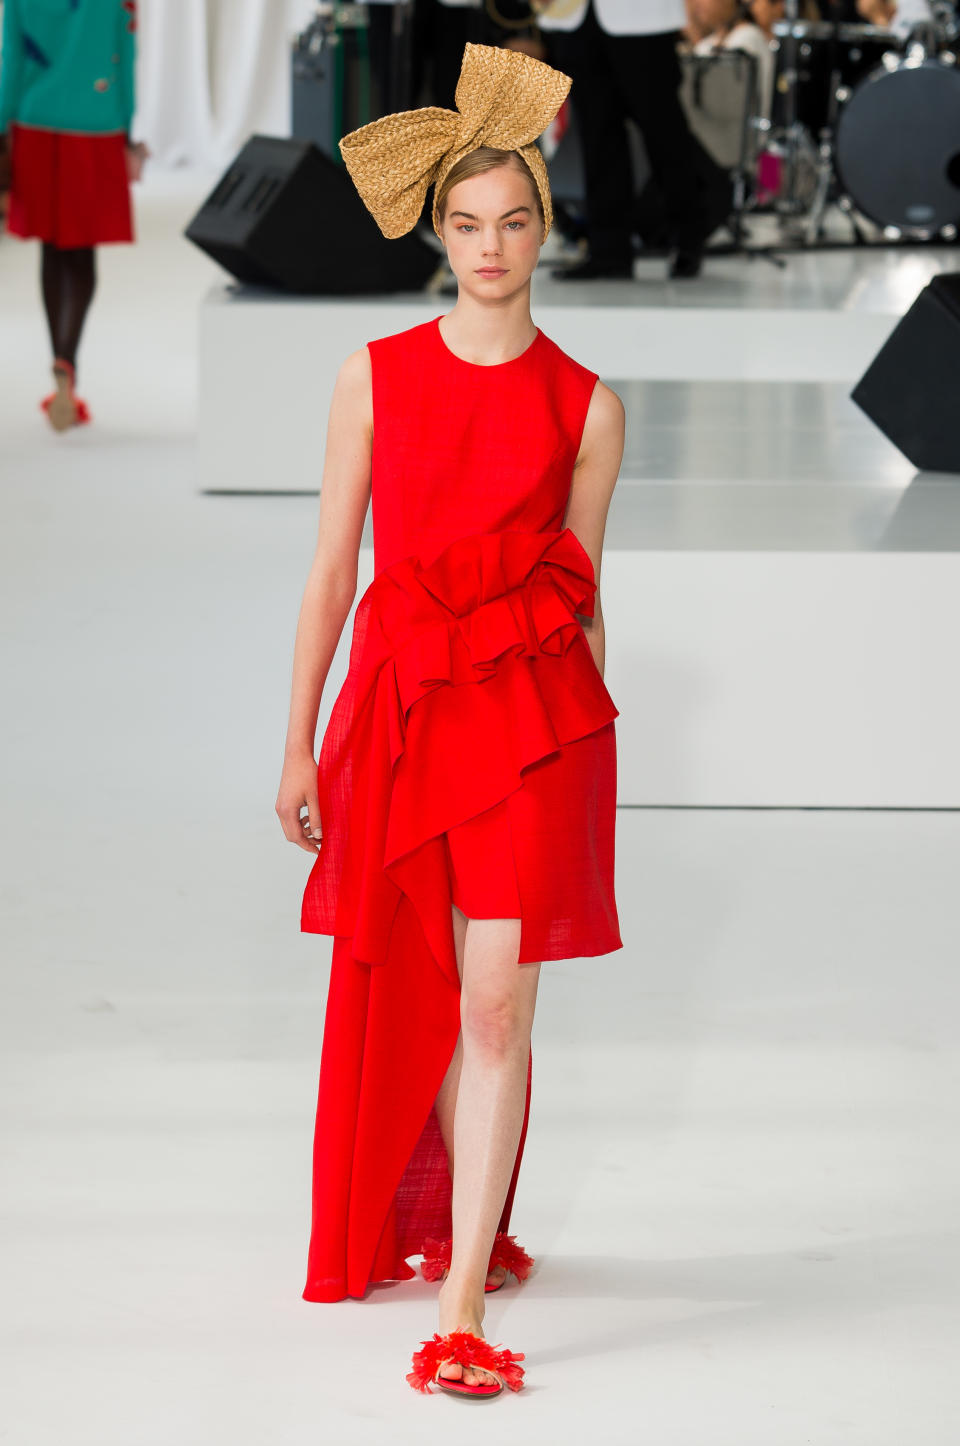 <p><i>Model wears a crimson, ruffle-tiered dress from the SS18 Delpozo collection. (Photo: ImaxTree) </i></p>